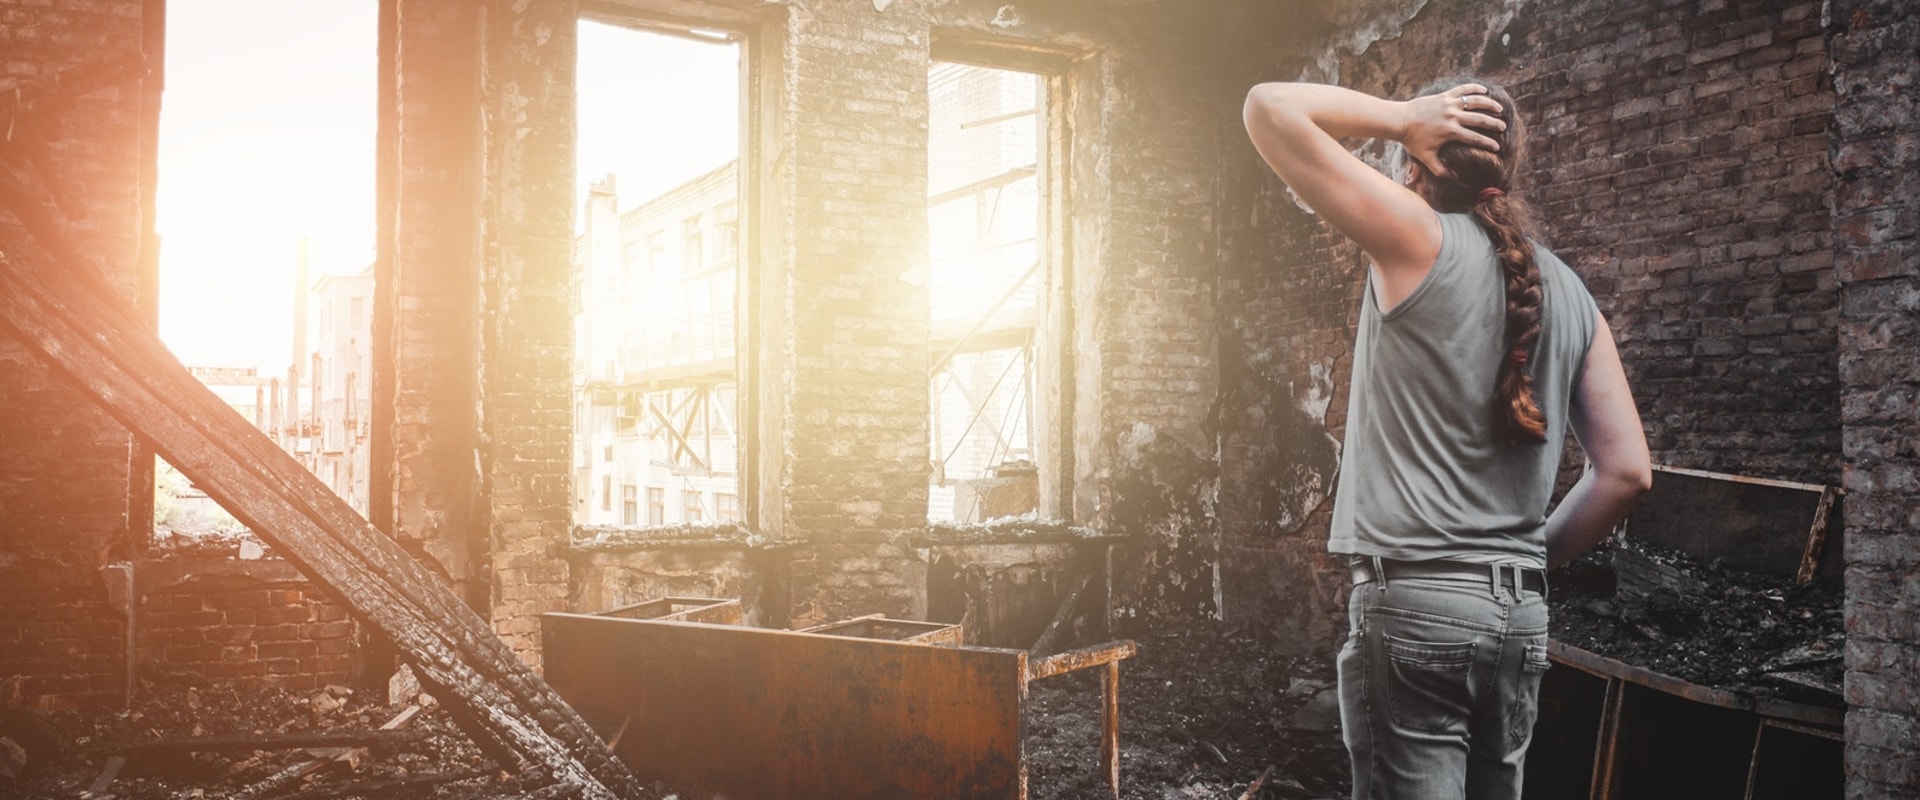 Cleaning Soot, Smoke, and Odors: A Comprehensive Guide for Fire Damage Restoration